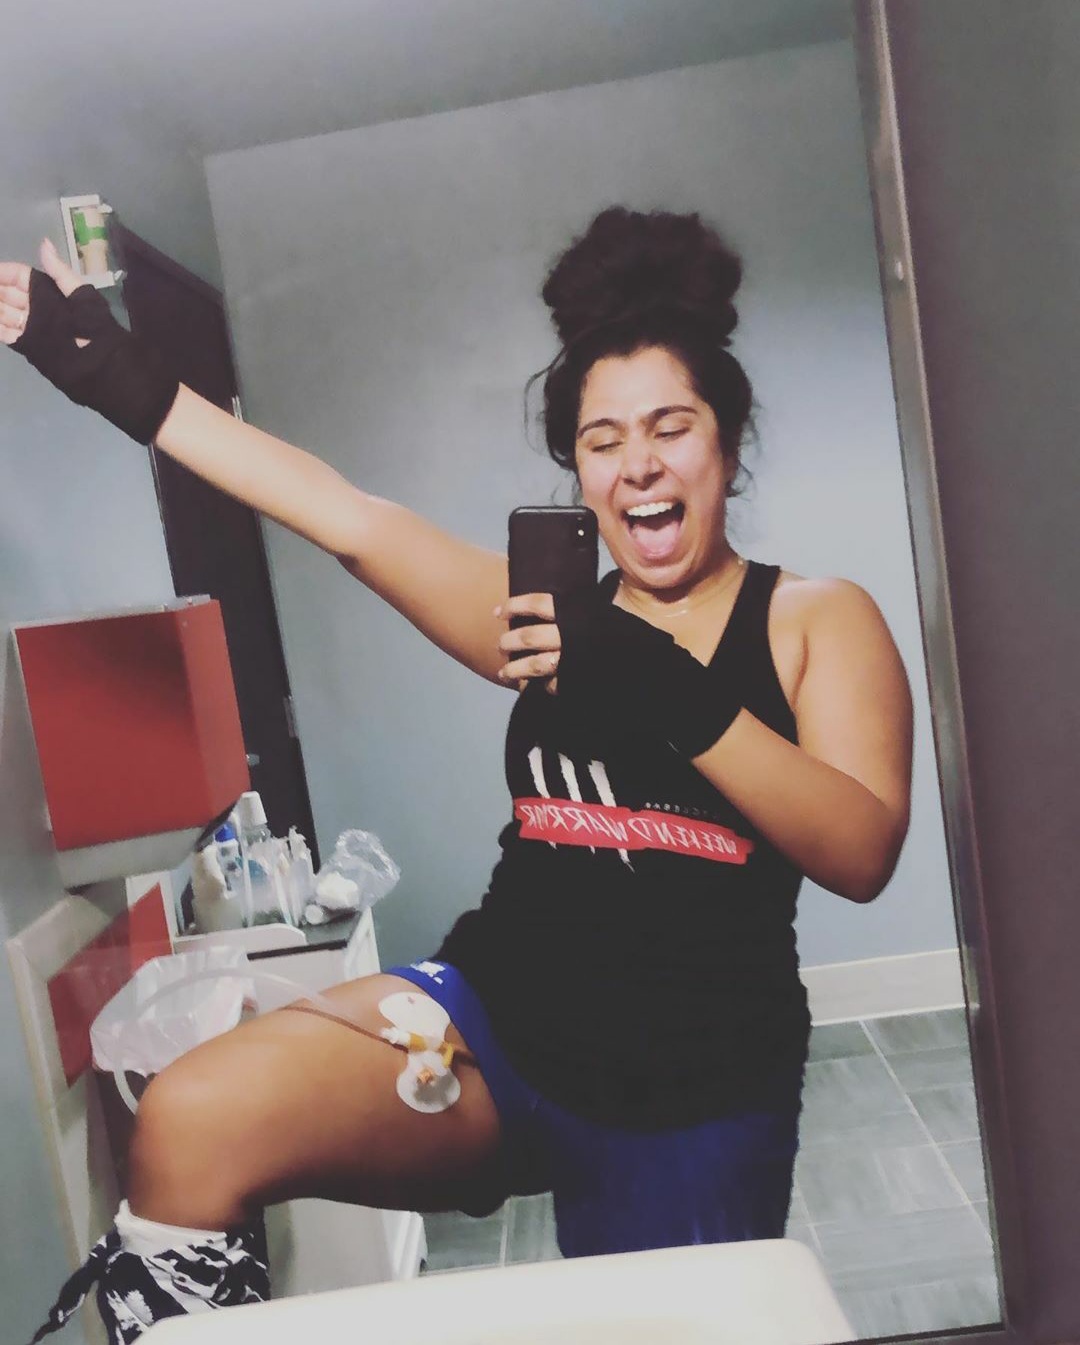 Elizabeth K'Mali, otherwise known as @educating_endo on Instagram, has stolen my heart with her empowering story of strength and resilience.